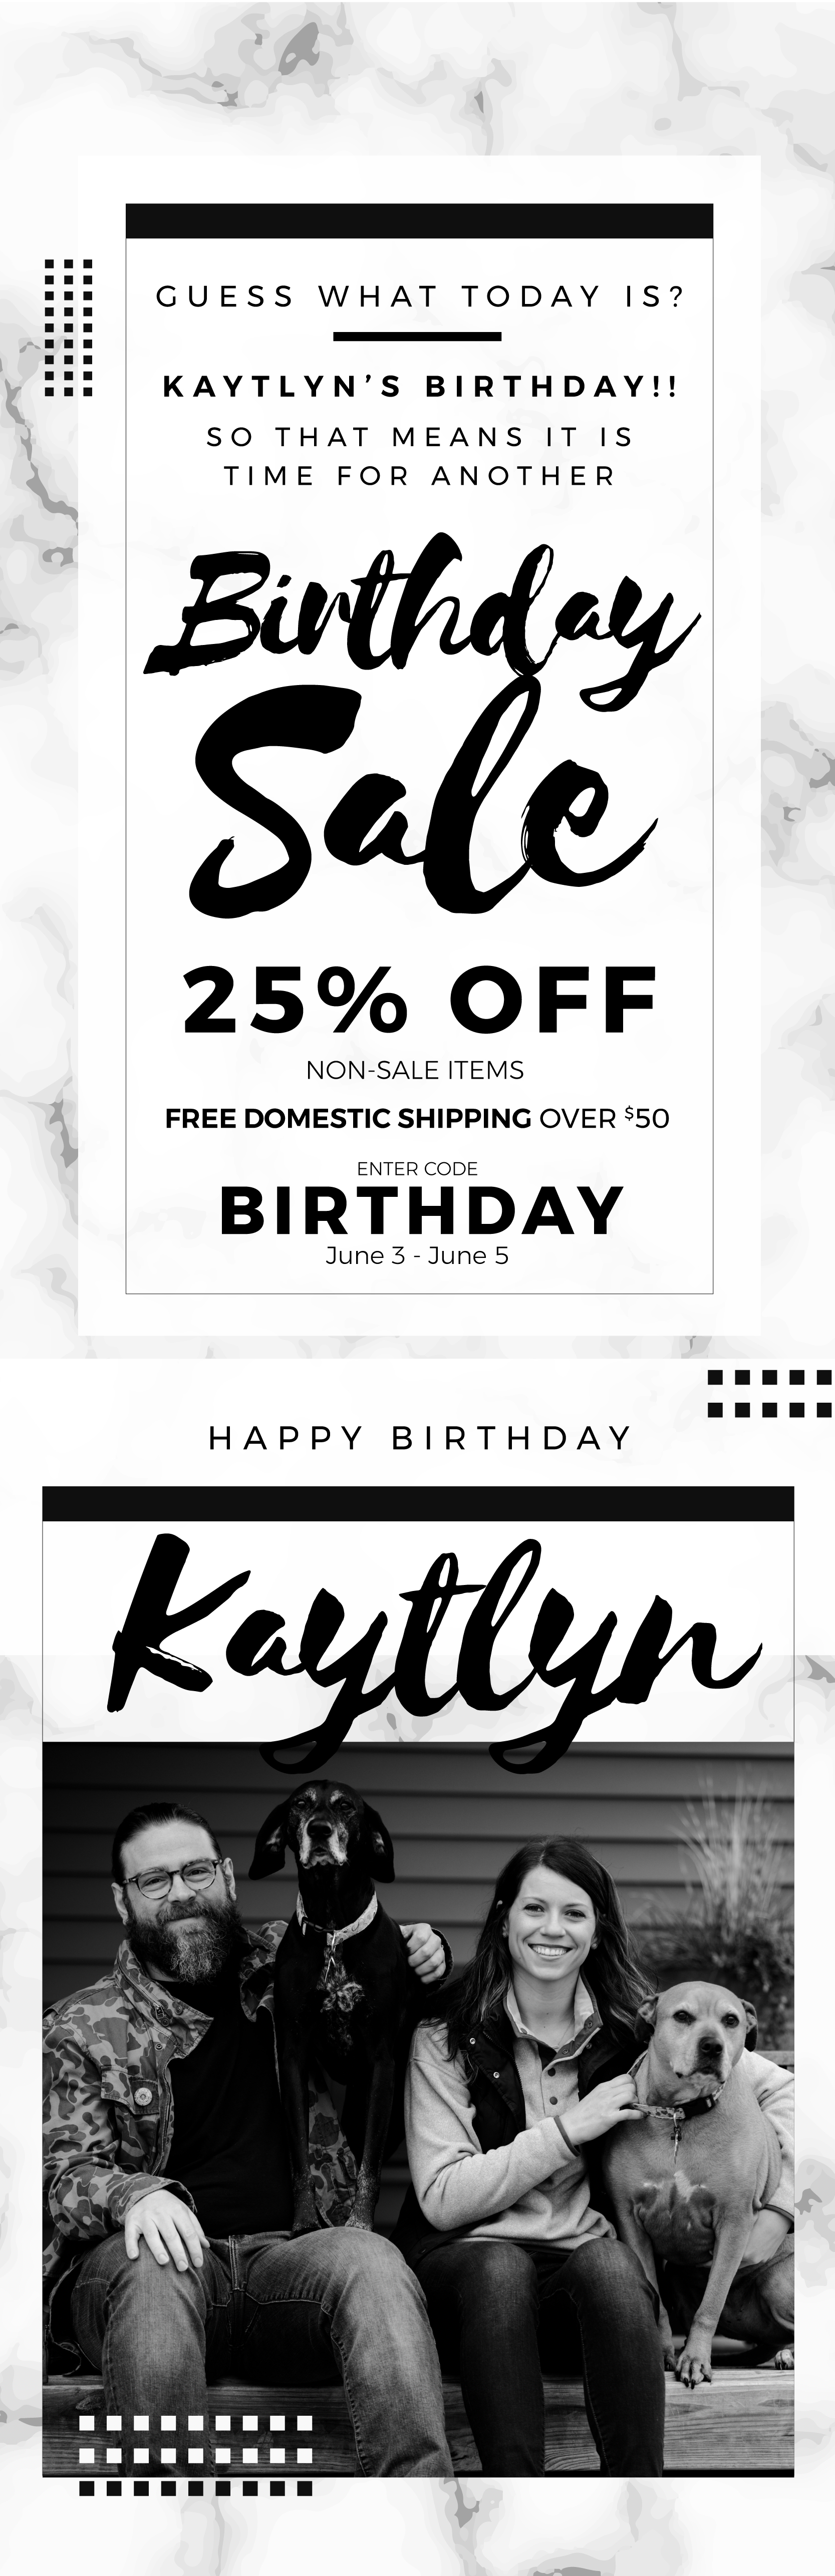 Today is a very special day...it is Kaytlyn's Birthday!